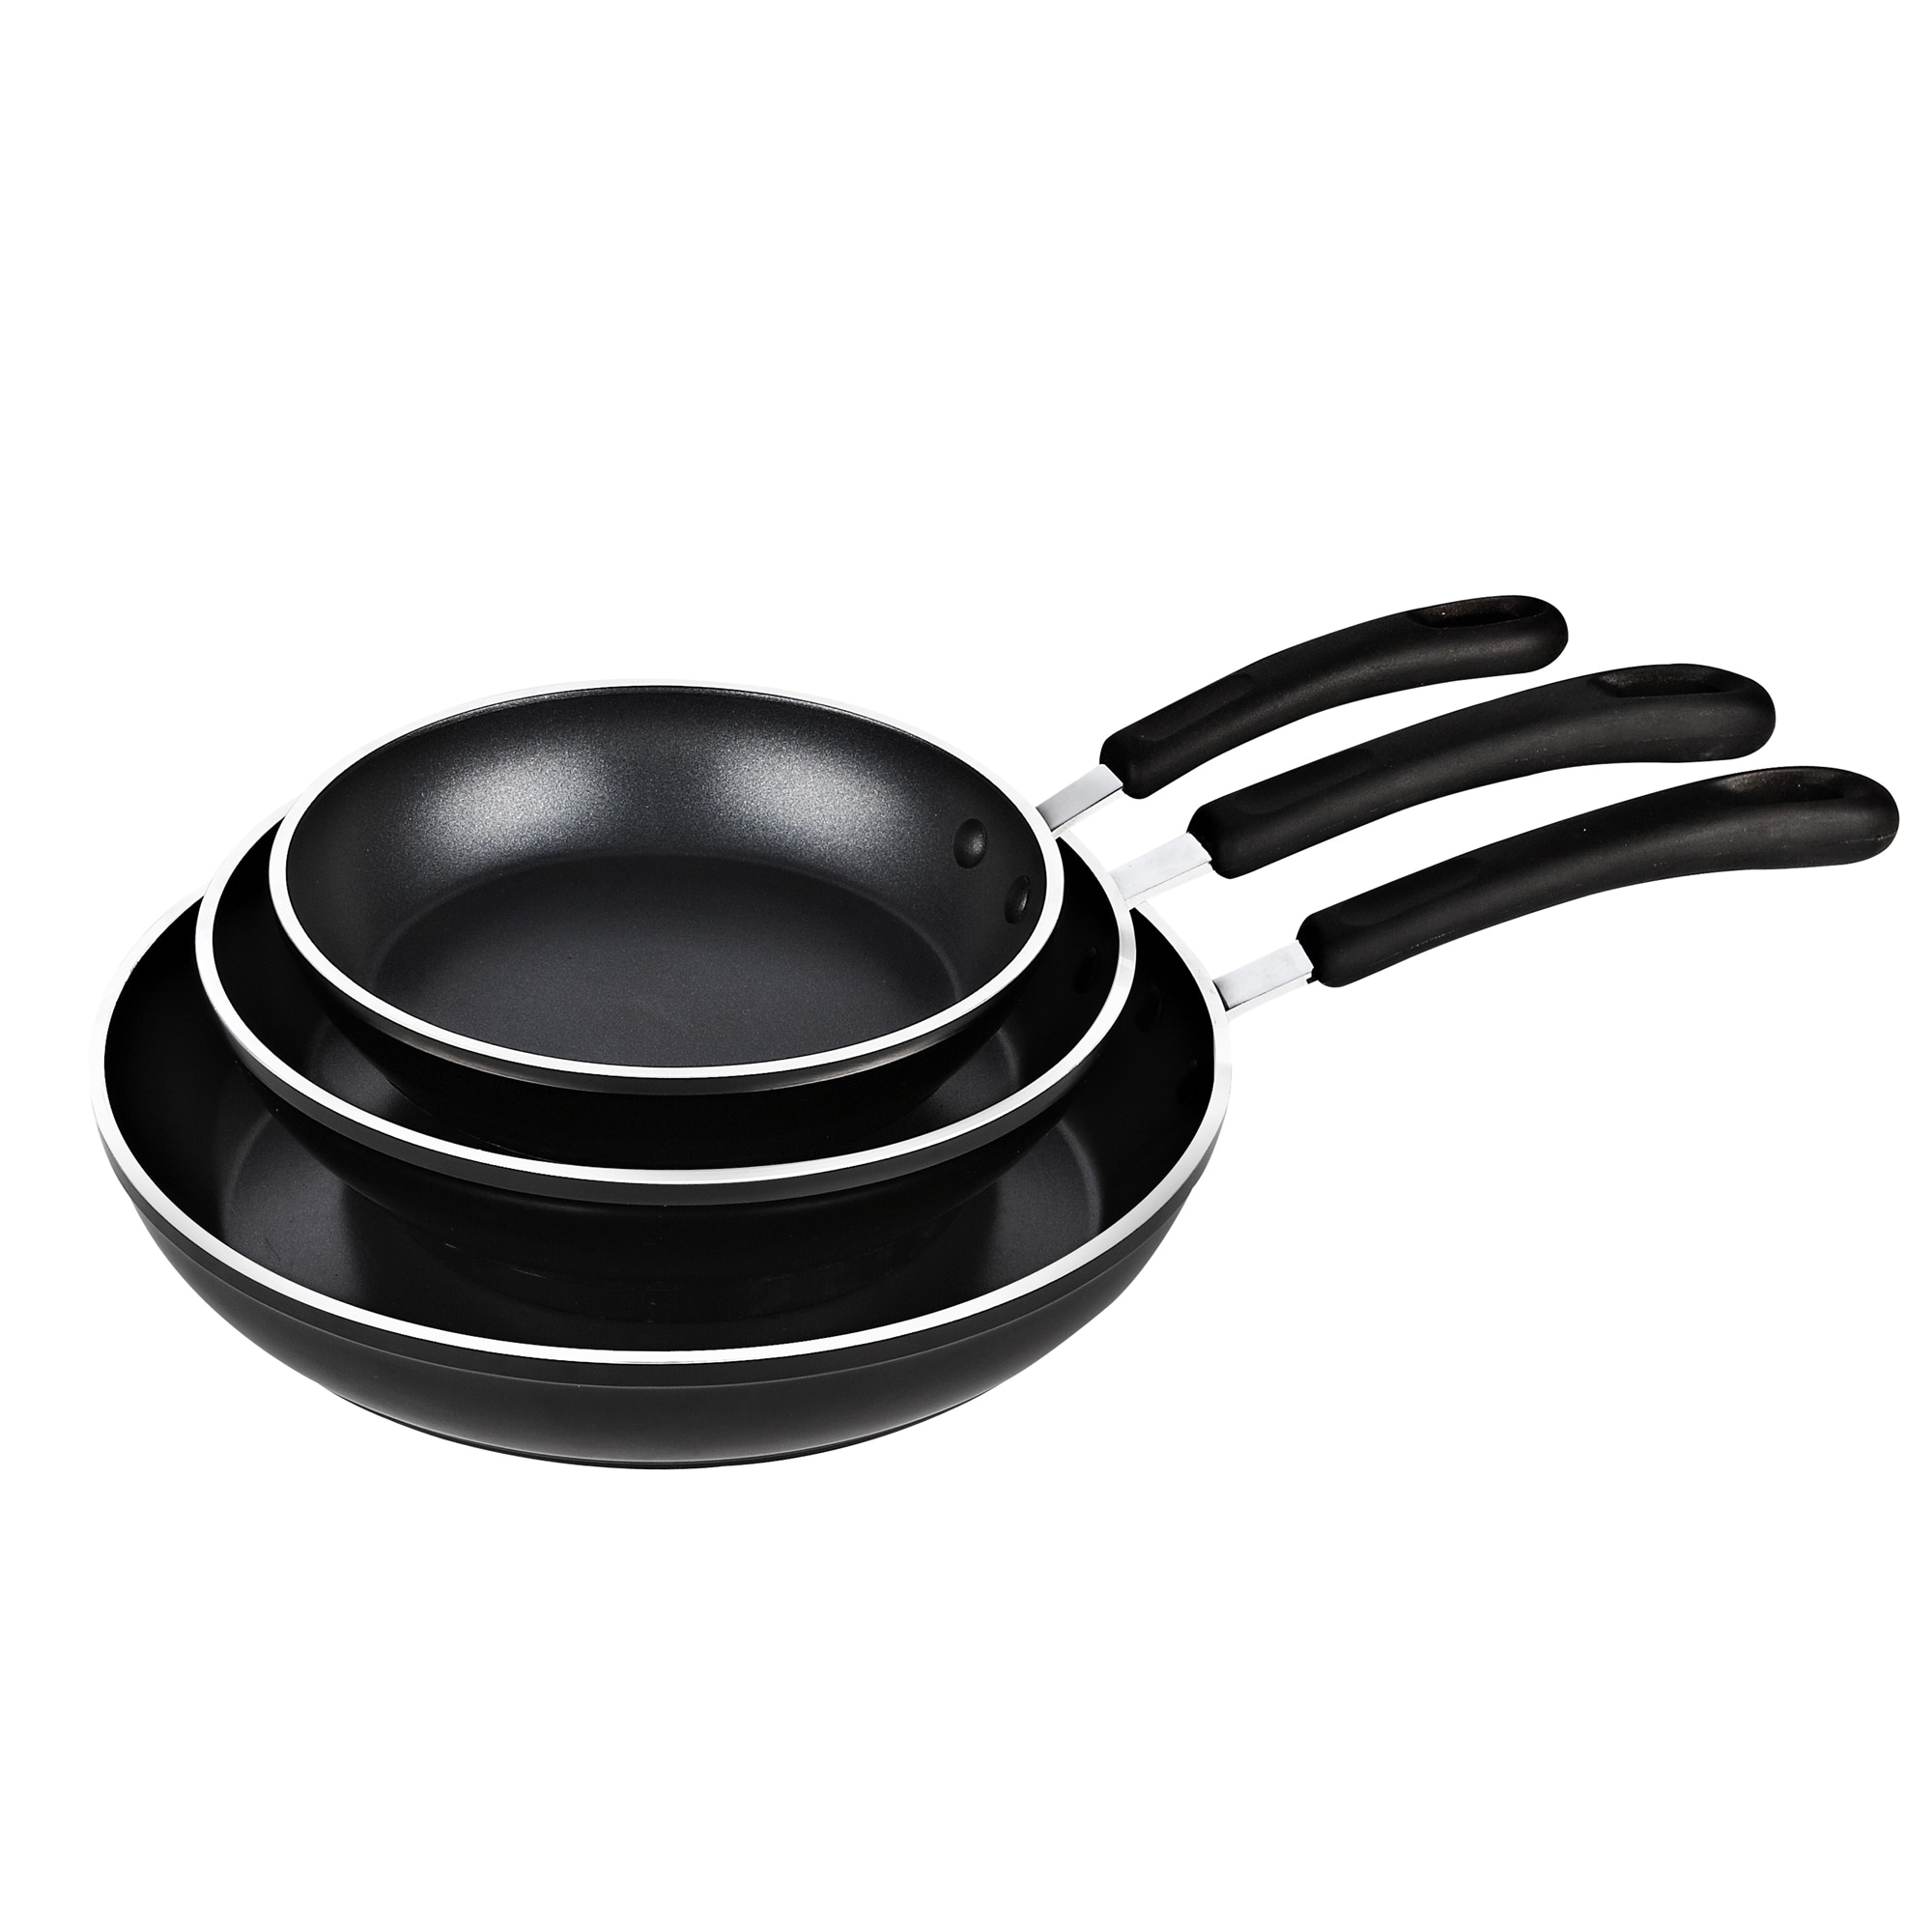 Details about   Cook N Home 02404 12-Inch Frying Pan with Non-Stick Coating Induction Compatible 